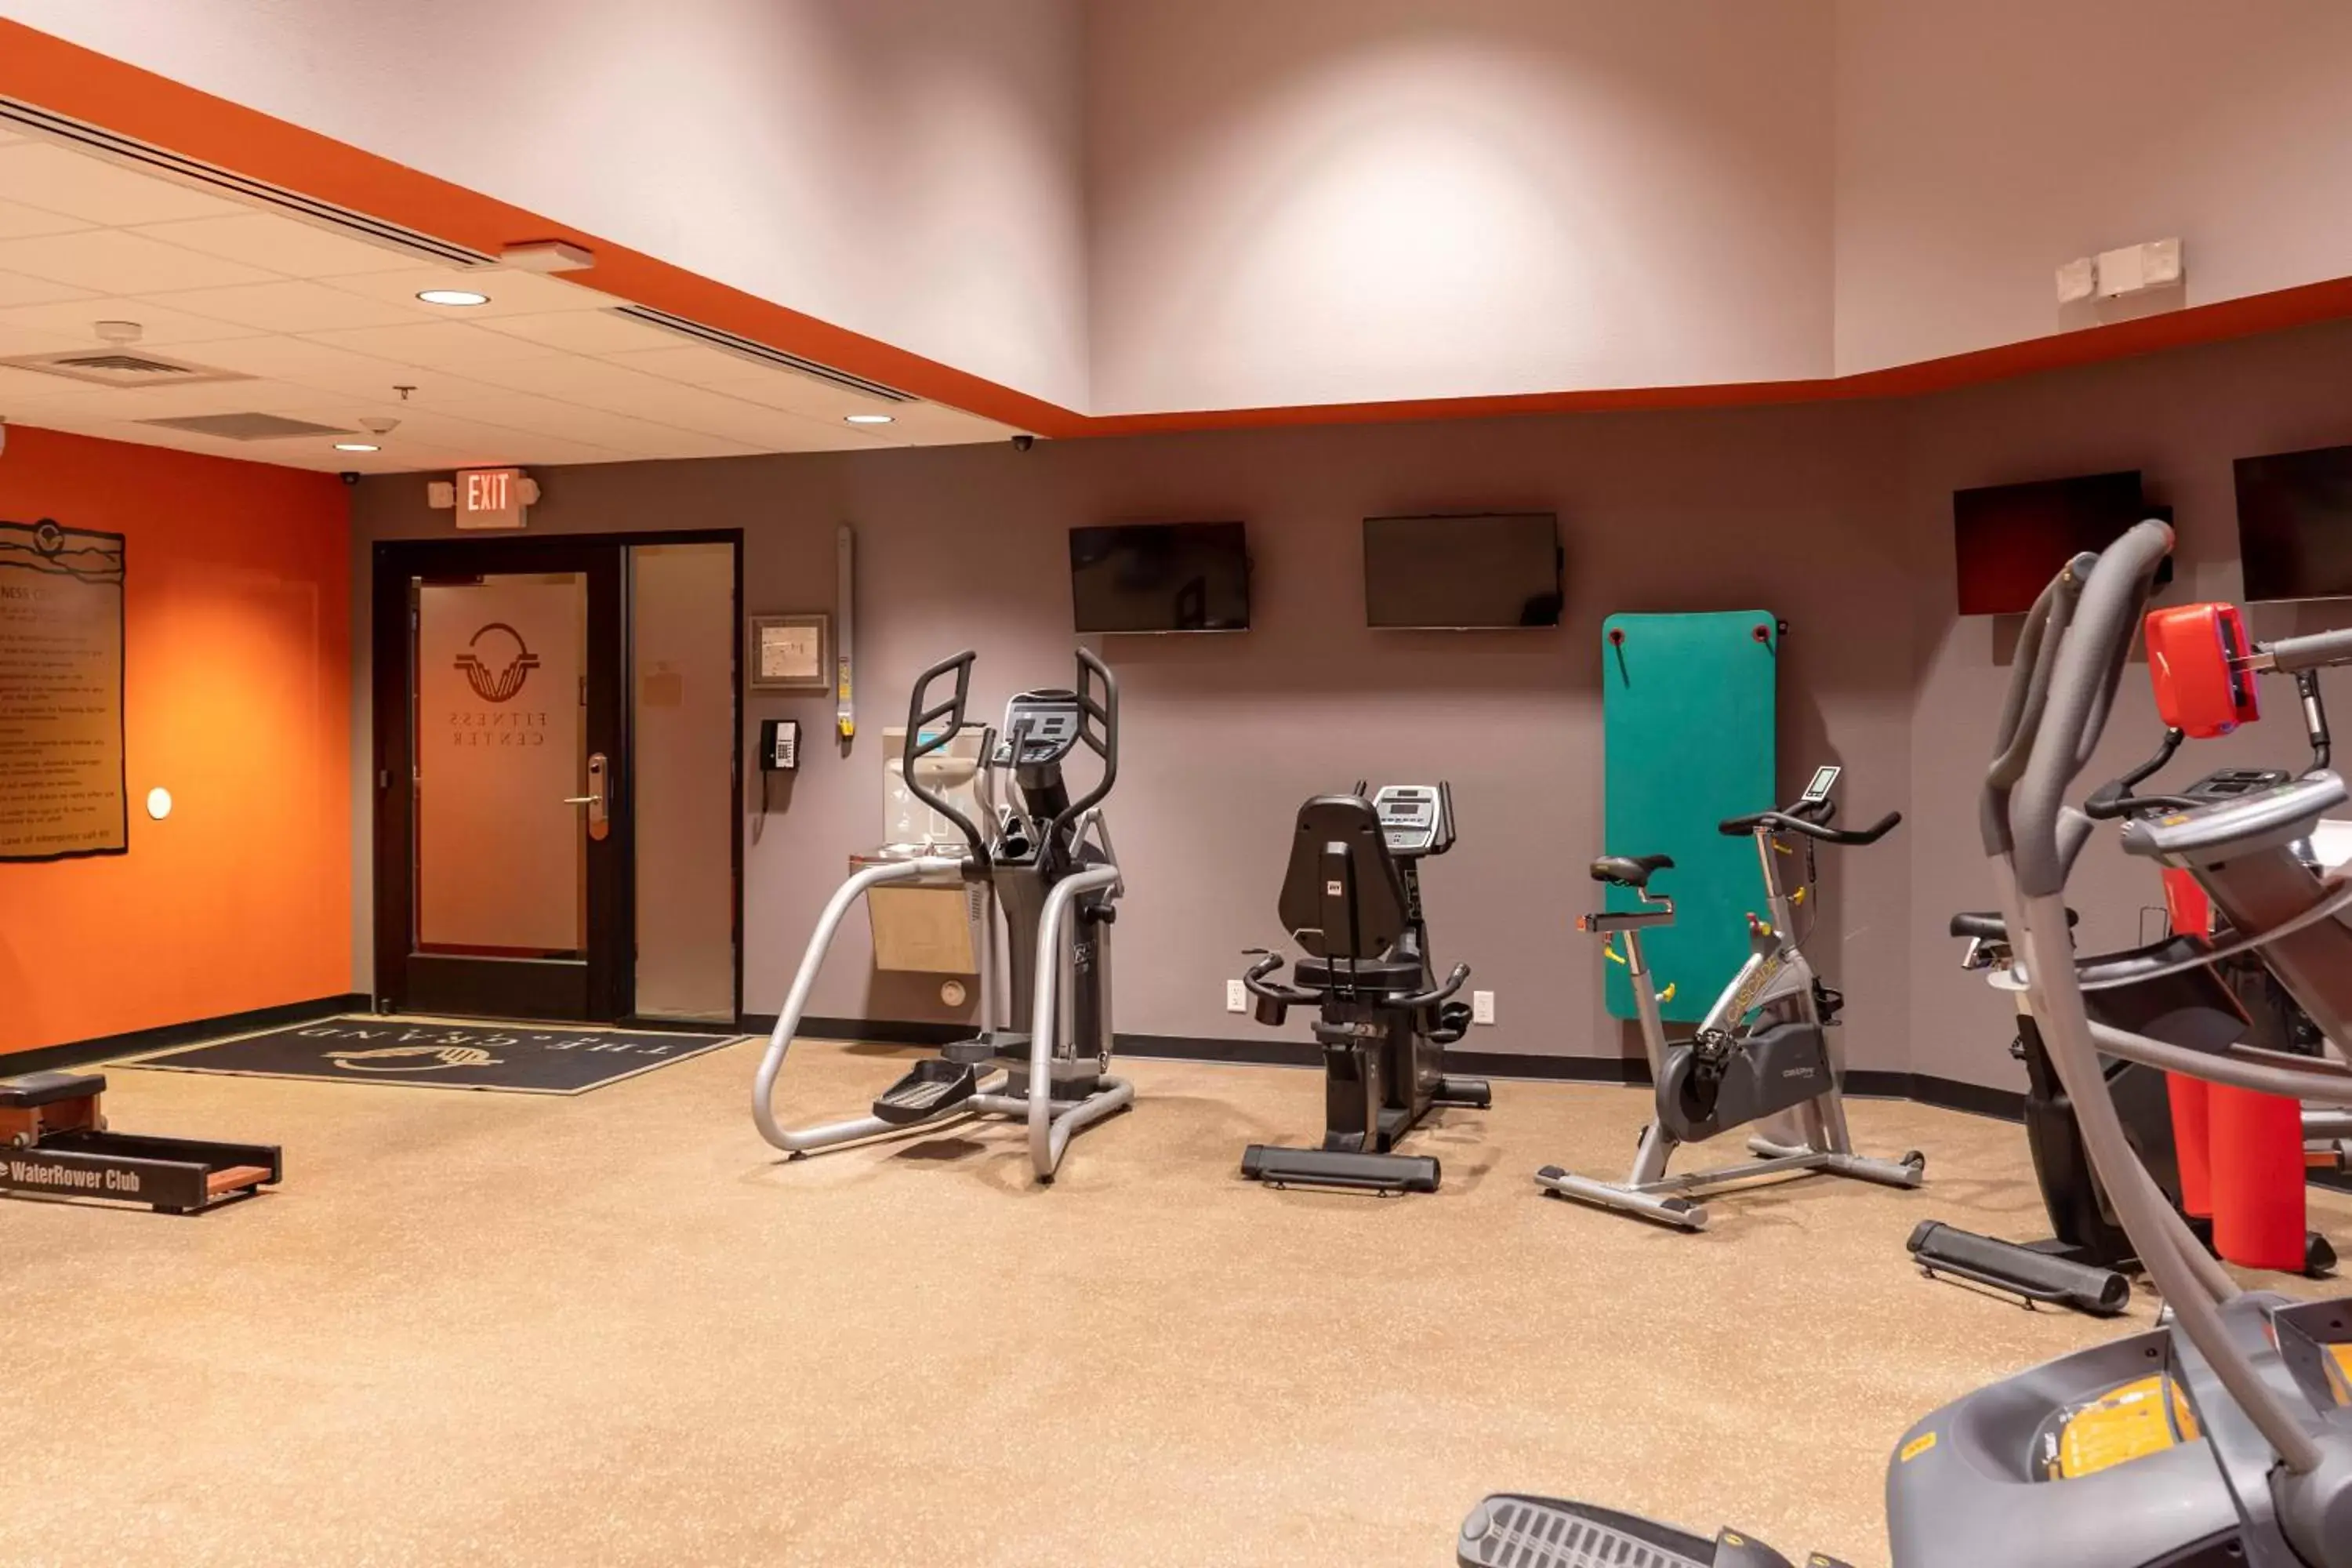 Fitness centre/facilities, Fitness Center/Facilities in The Grand Hotel at the Grand Canyon